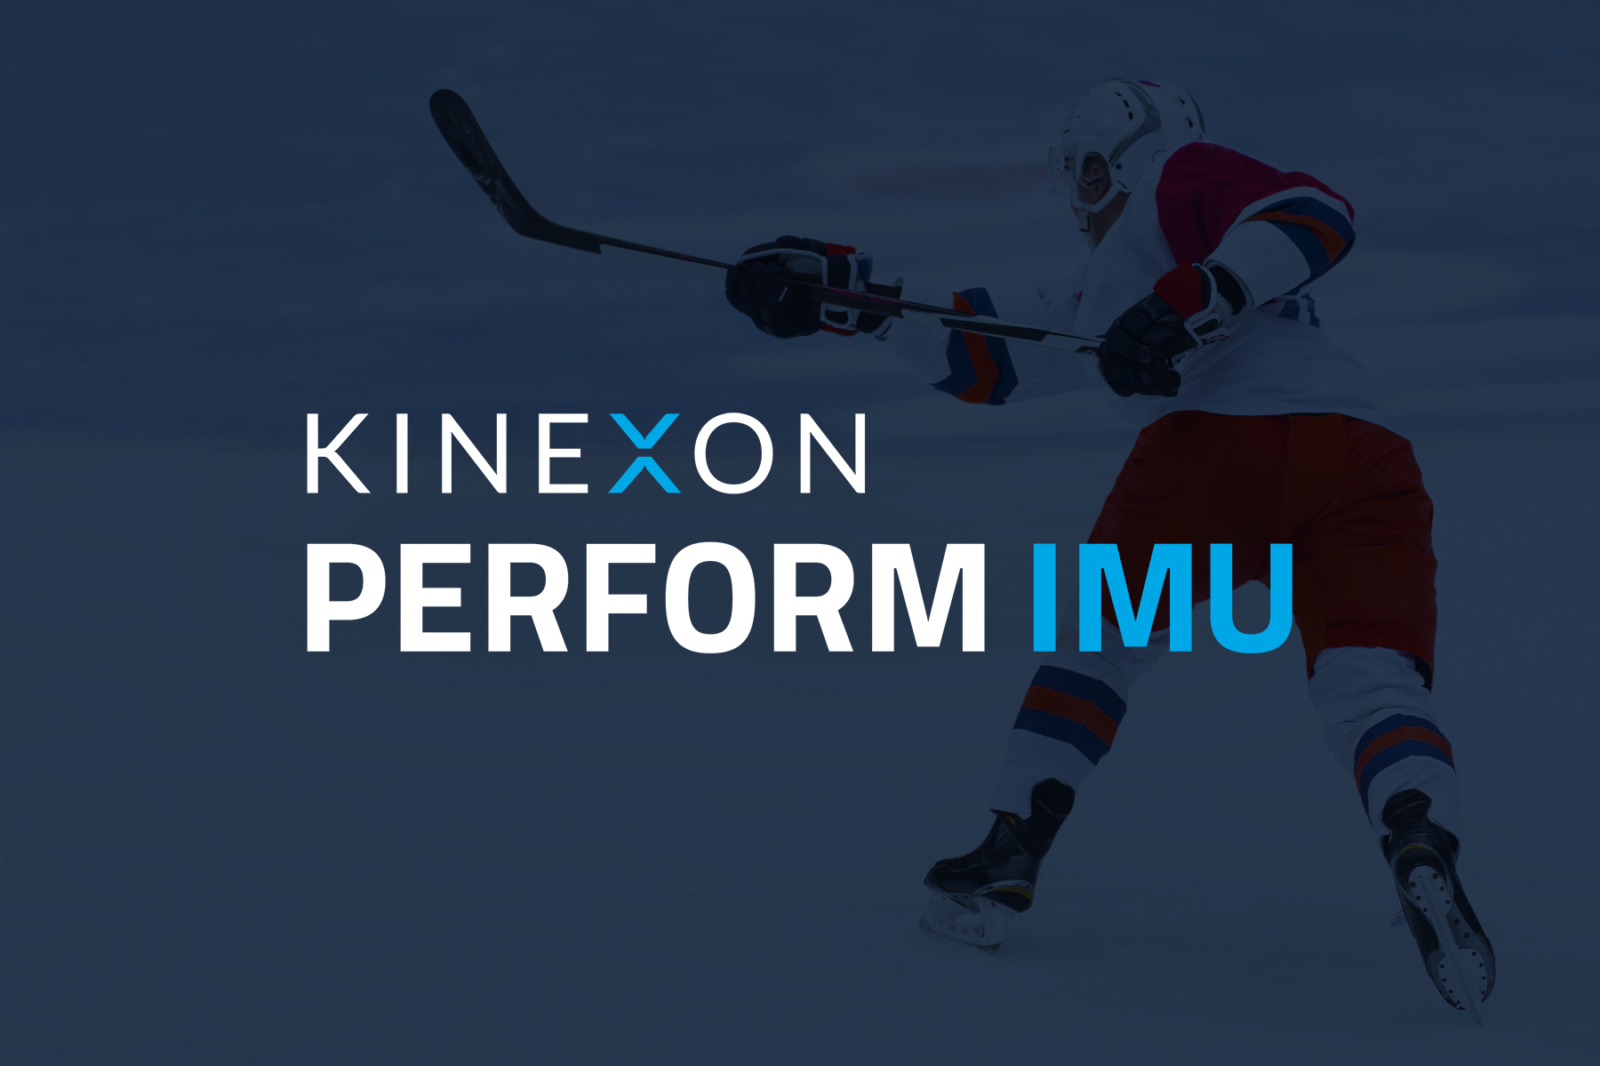 Coaches are now using IMU to track their players and get advanced statistics in hockey.